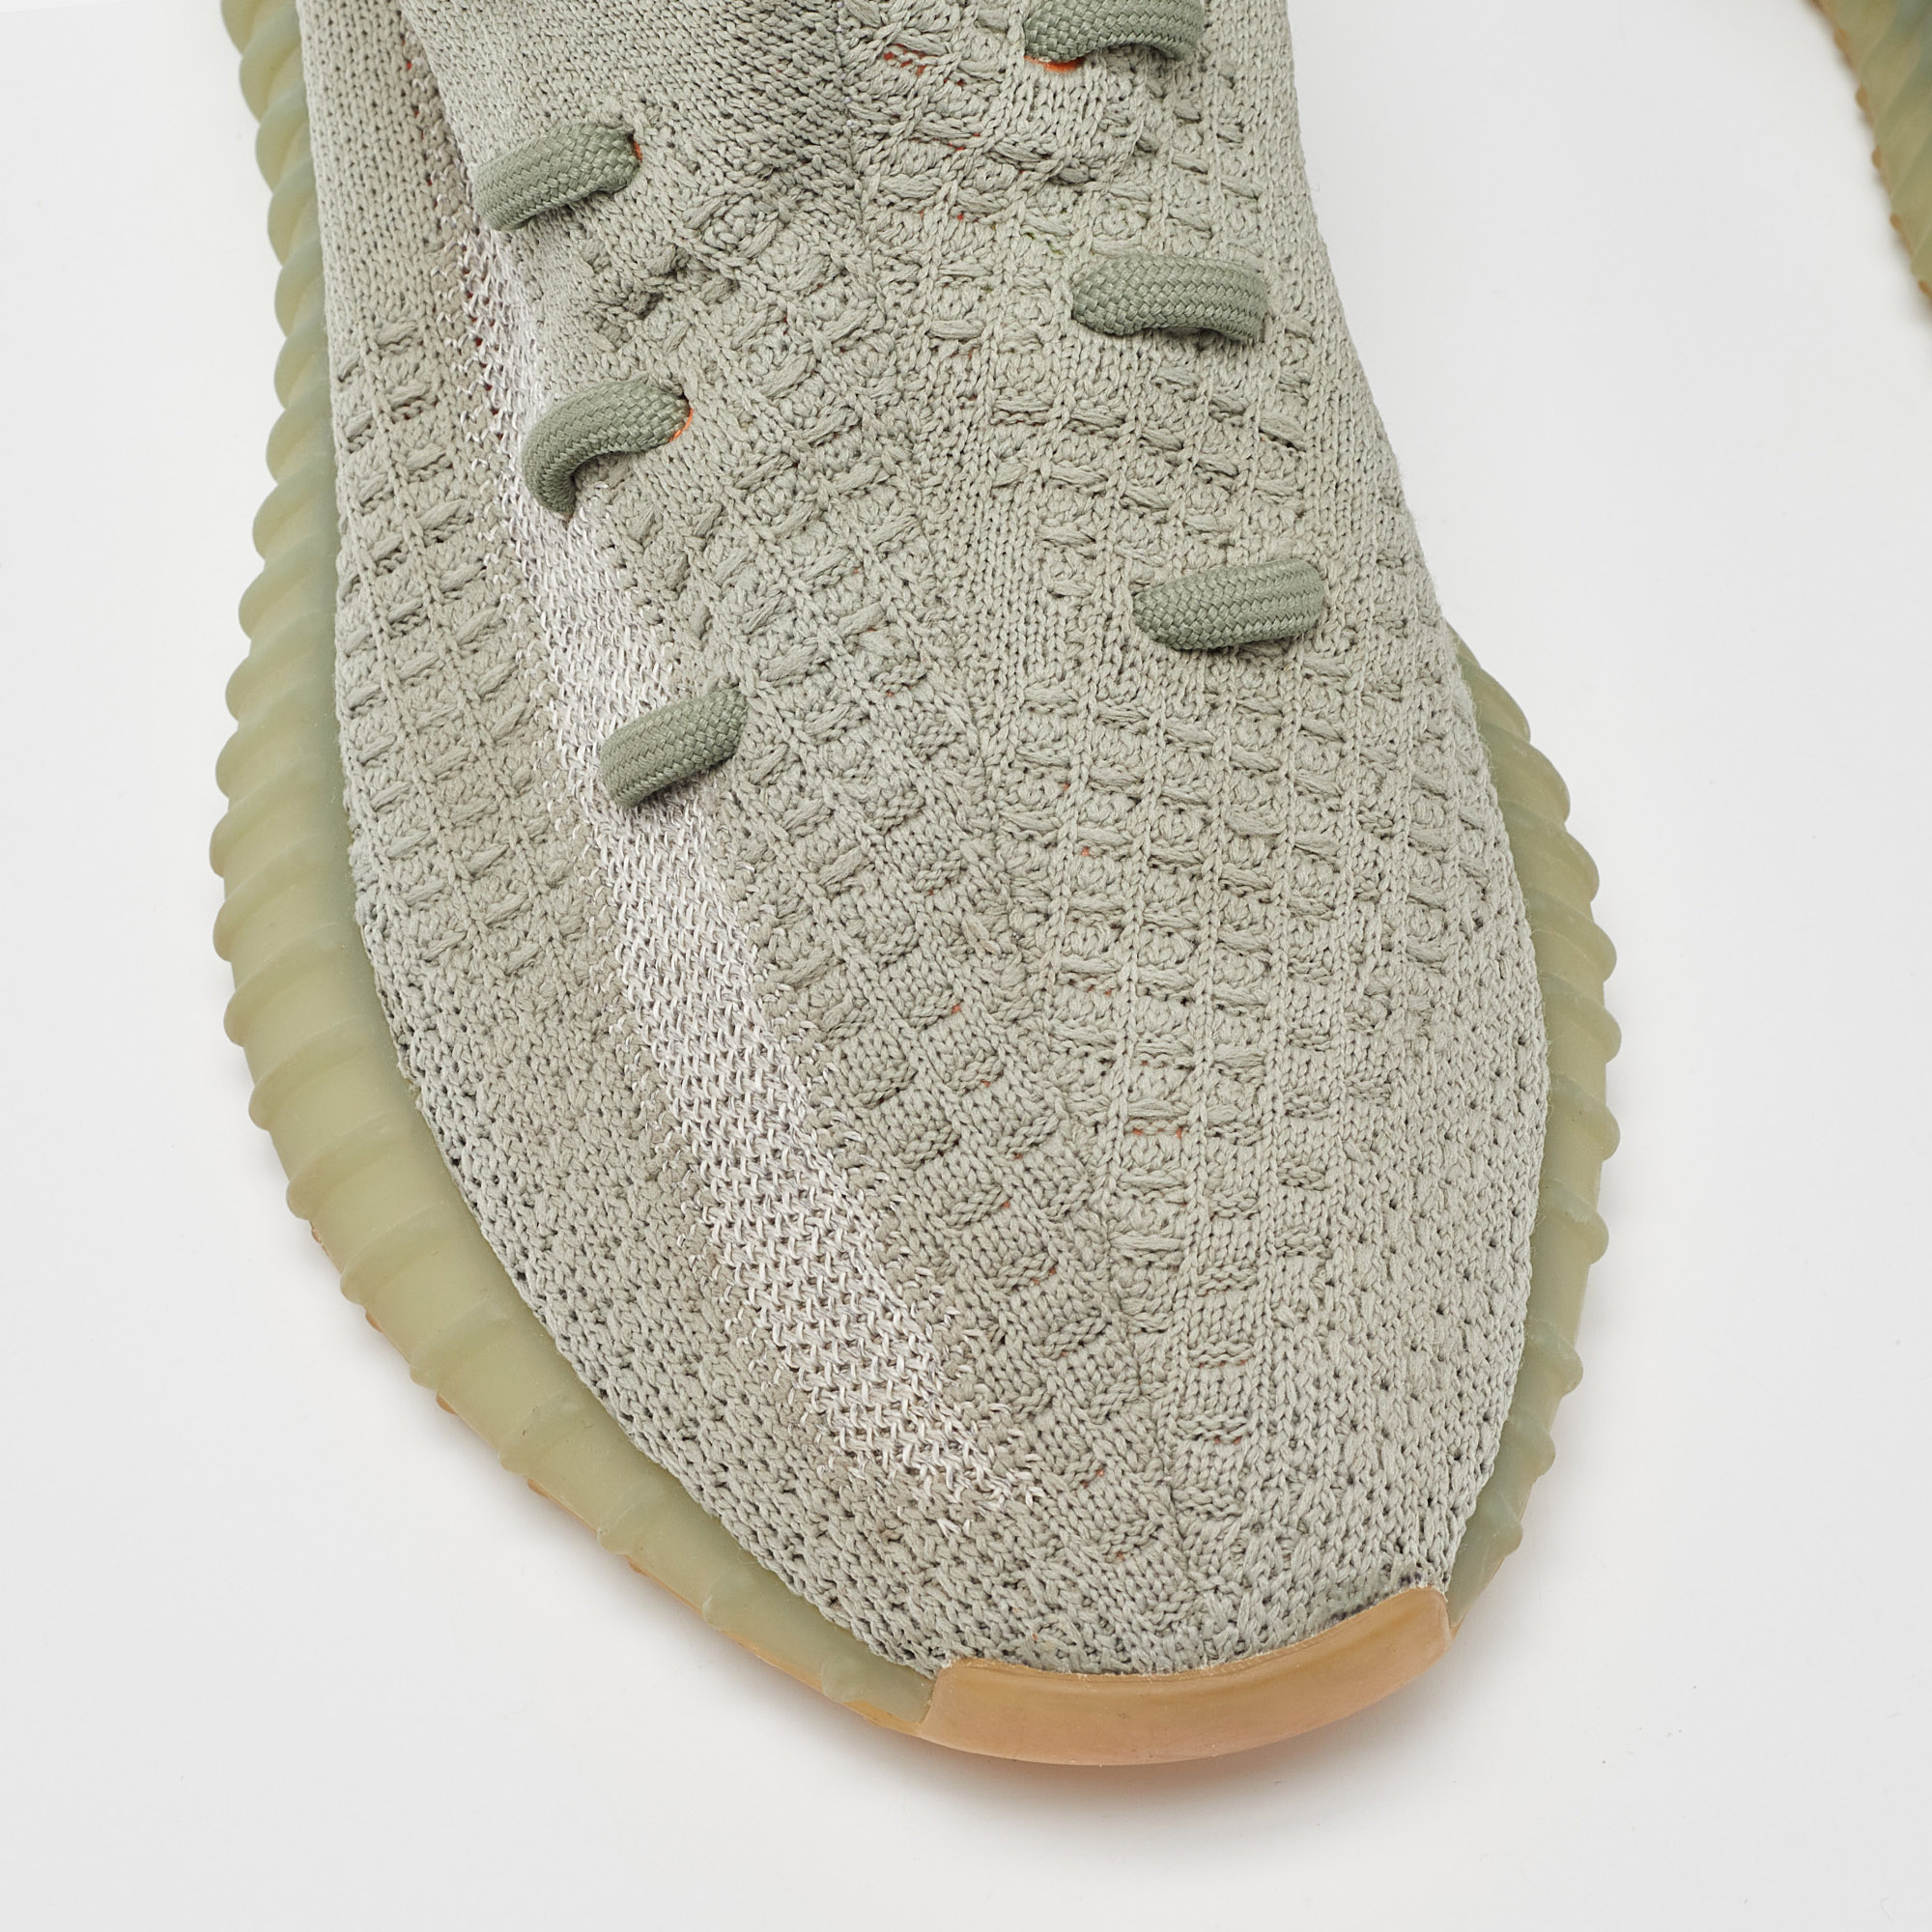 Yeezy X Adidas Green Knit Fabric Boost 350 V2 Desert-Sage Sneakers Size 38